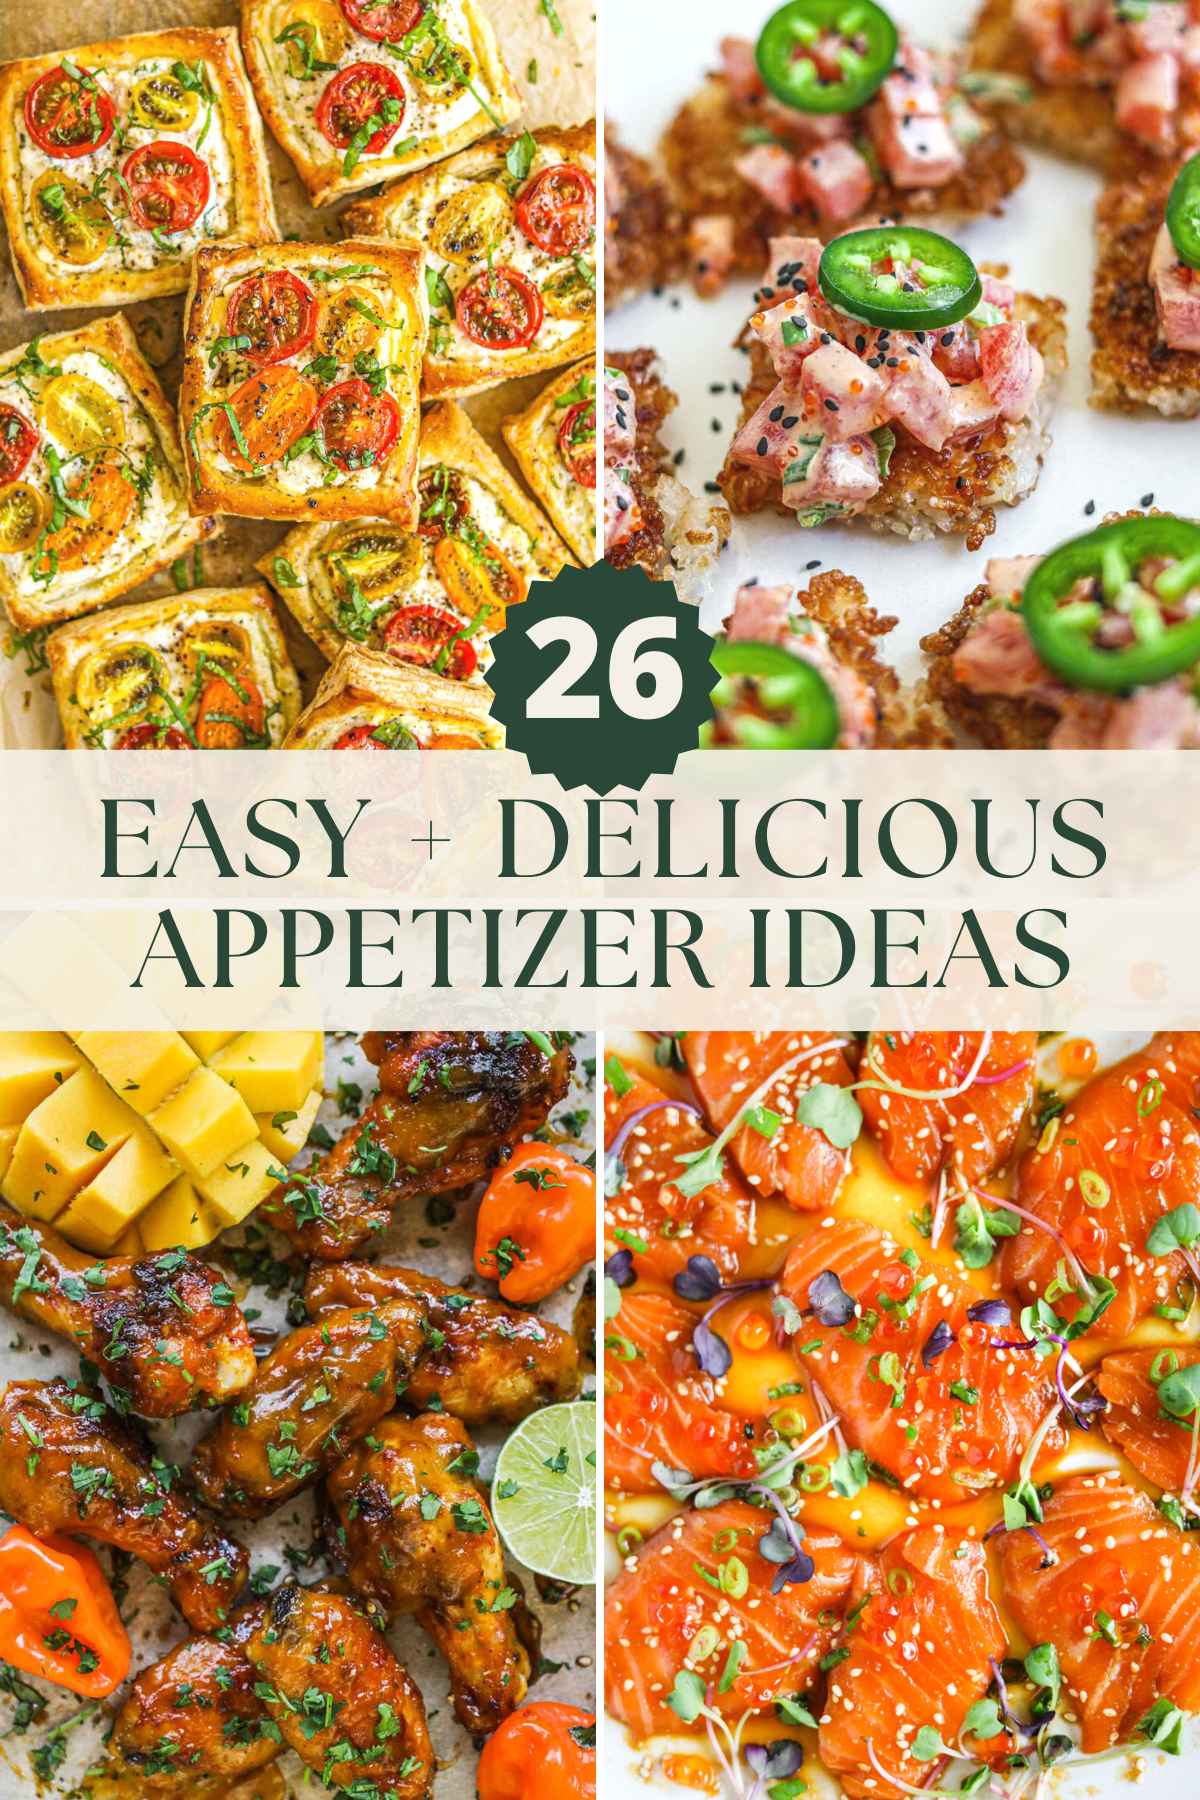 26 easy and delicious appetizer ideas, tomato tartlets, crispy rice with spicy tuna, wings, and miso salmon carpaccio.